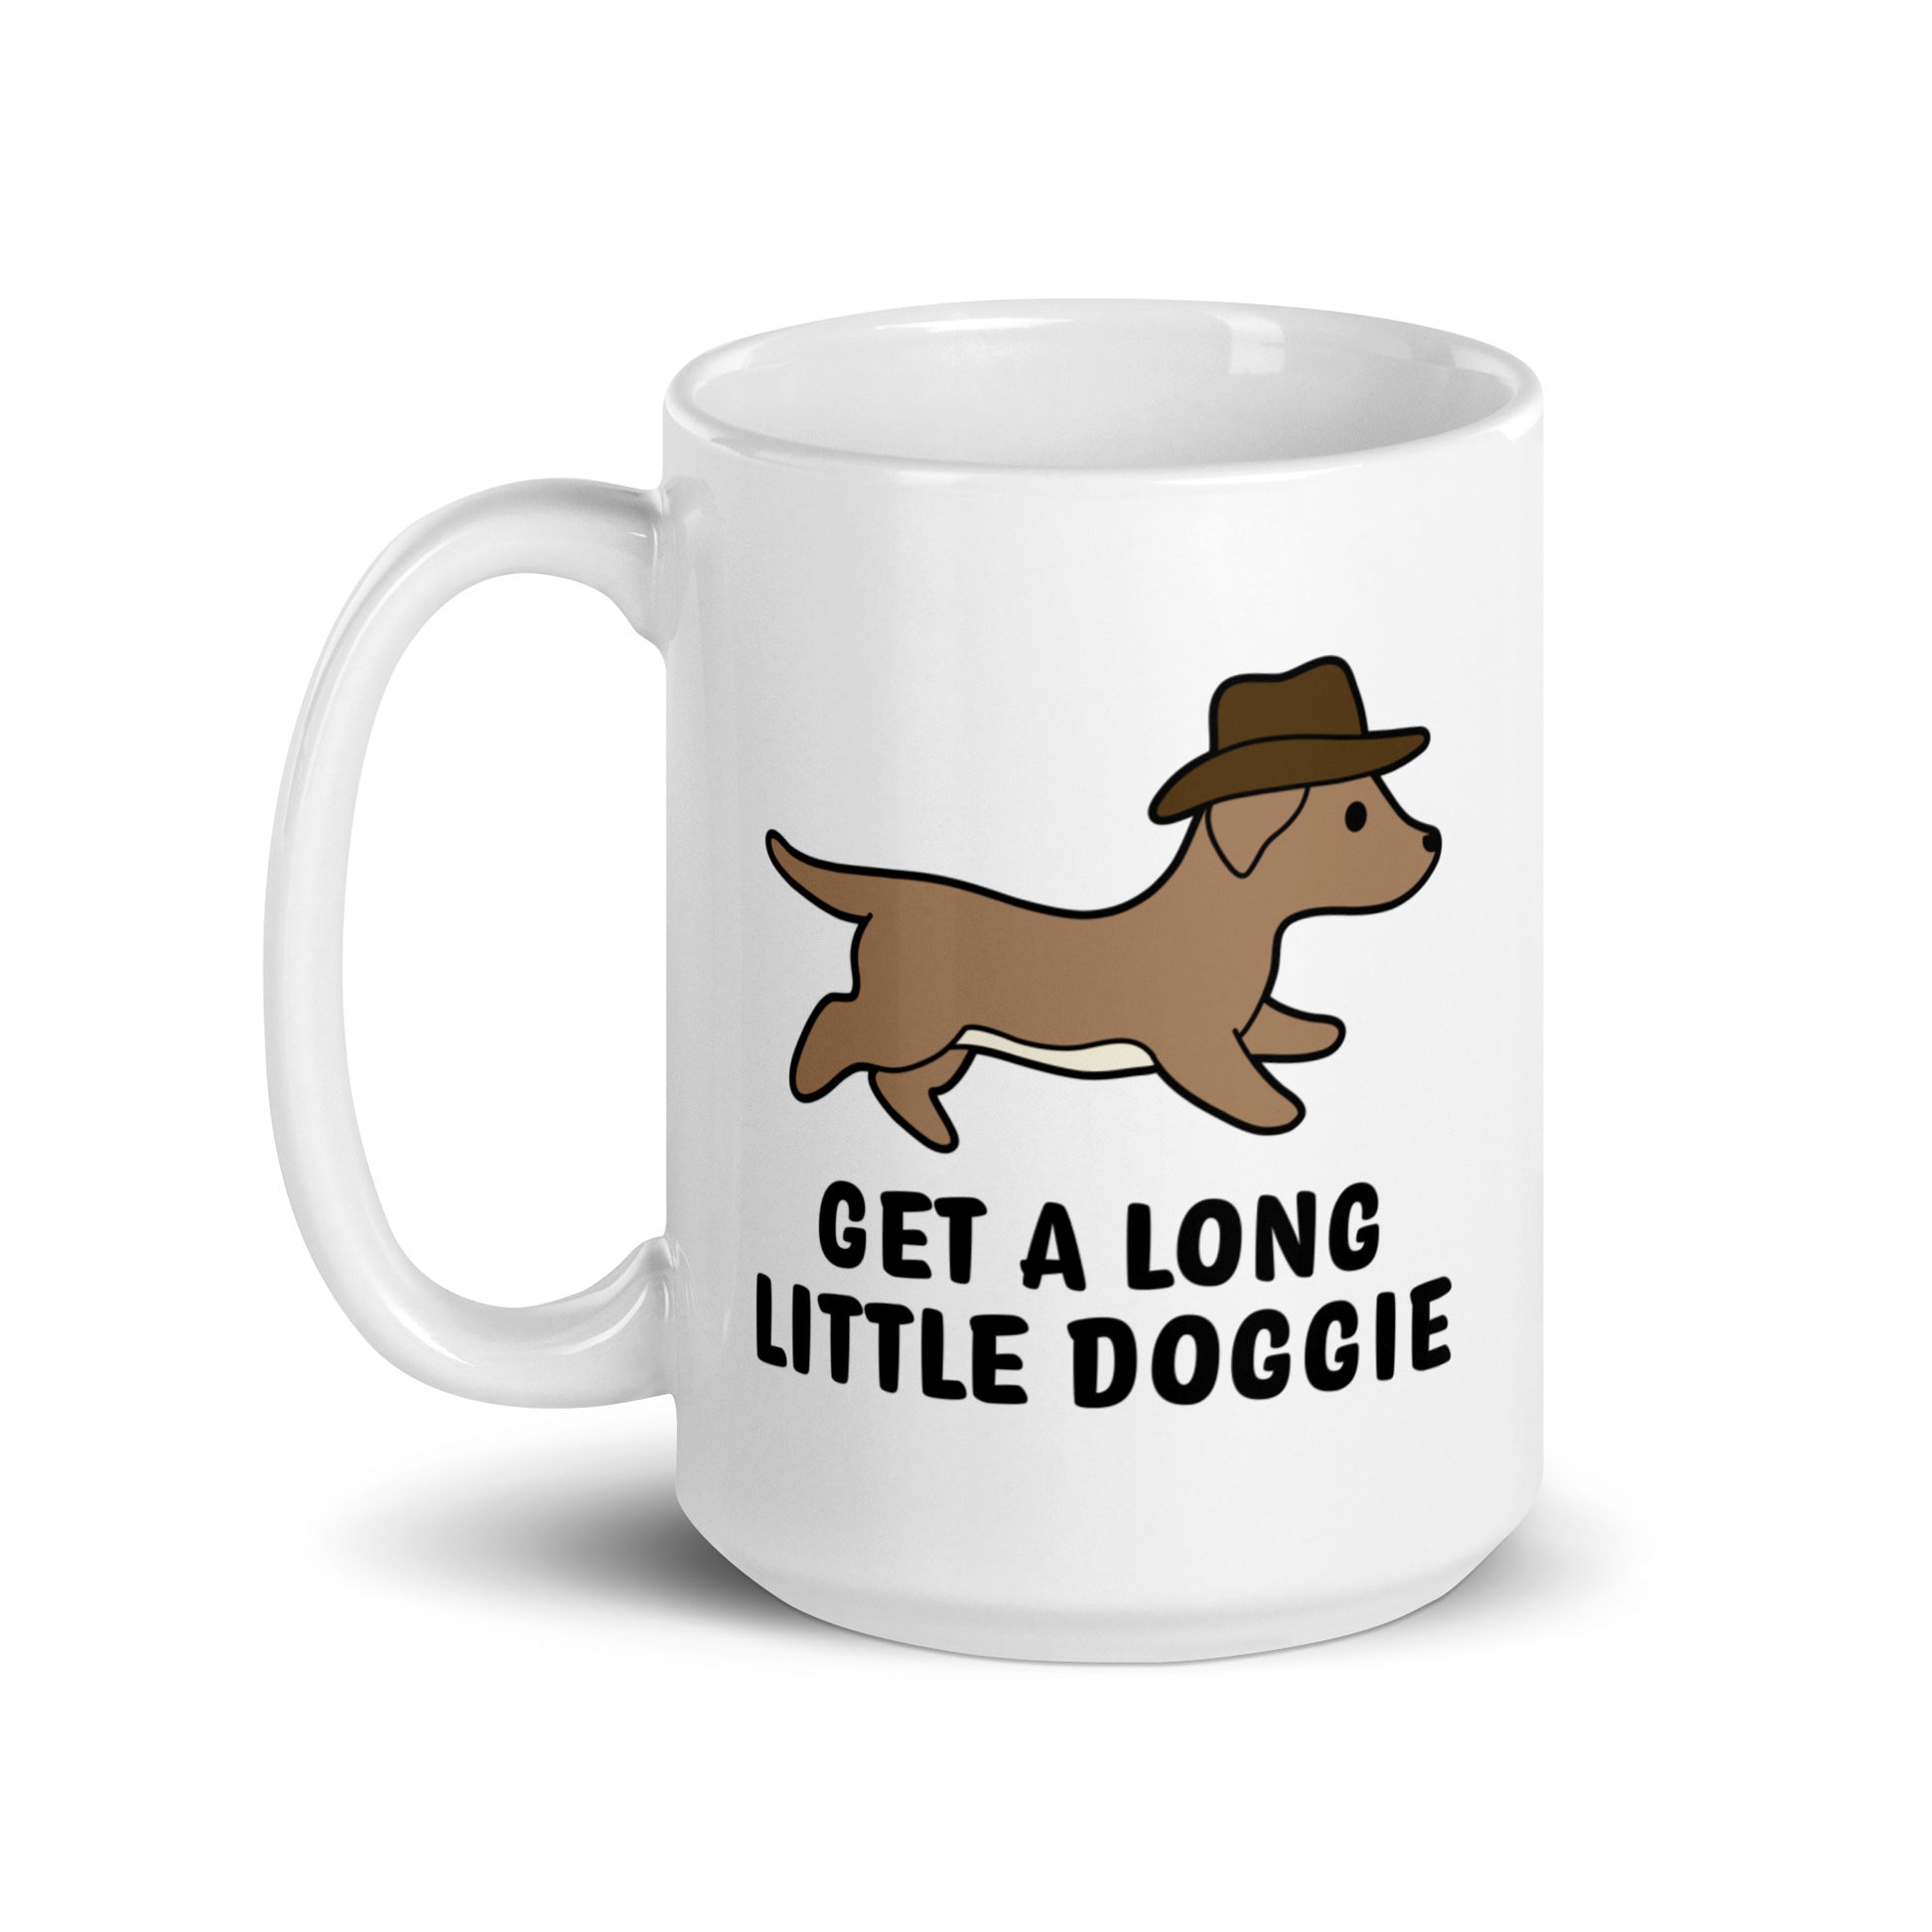 A white 15 ounce ceramic mug featuring an image of a dachshund wearing a cowboy hat. Text below the dog reads "Get a long little doggie"